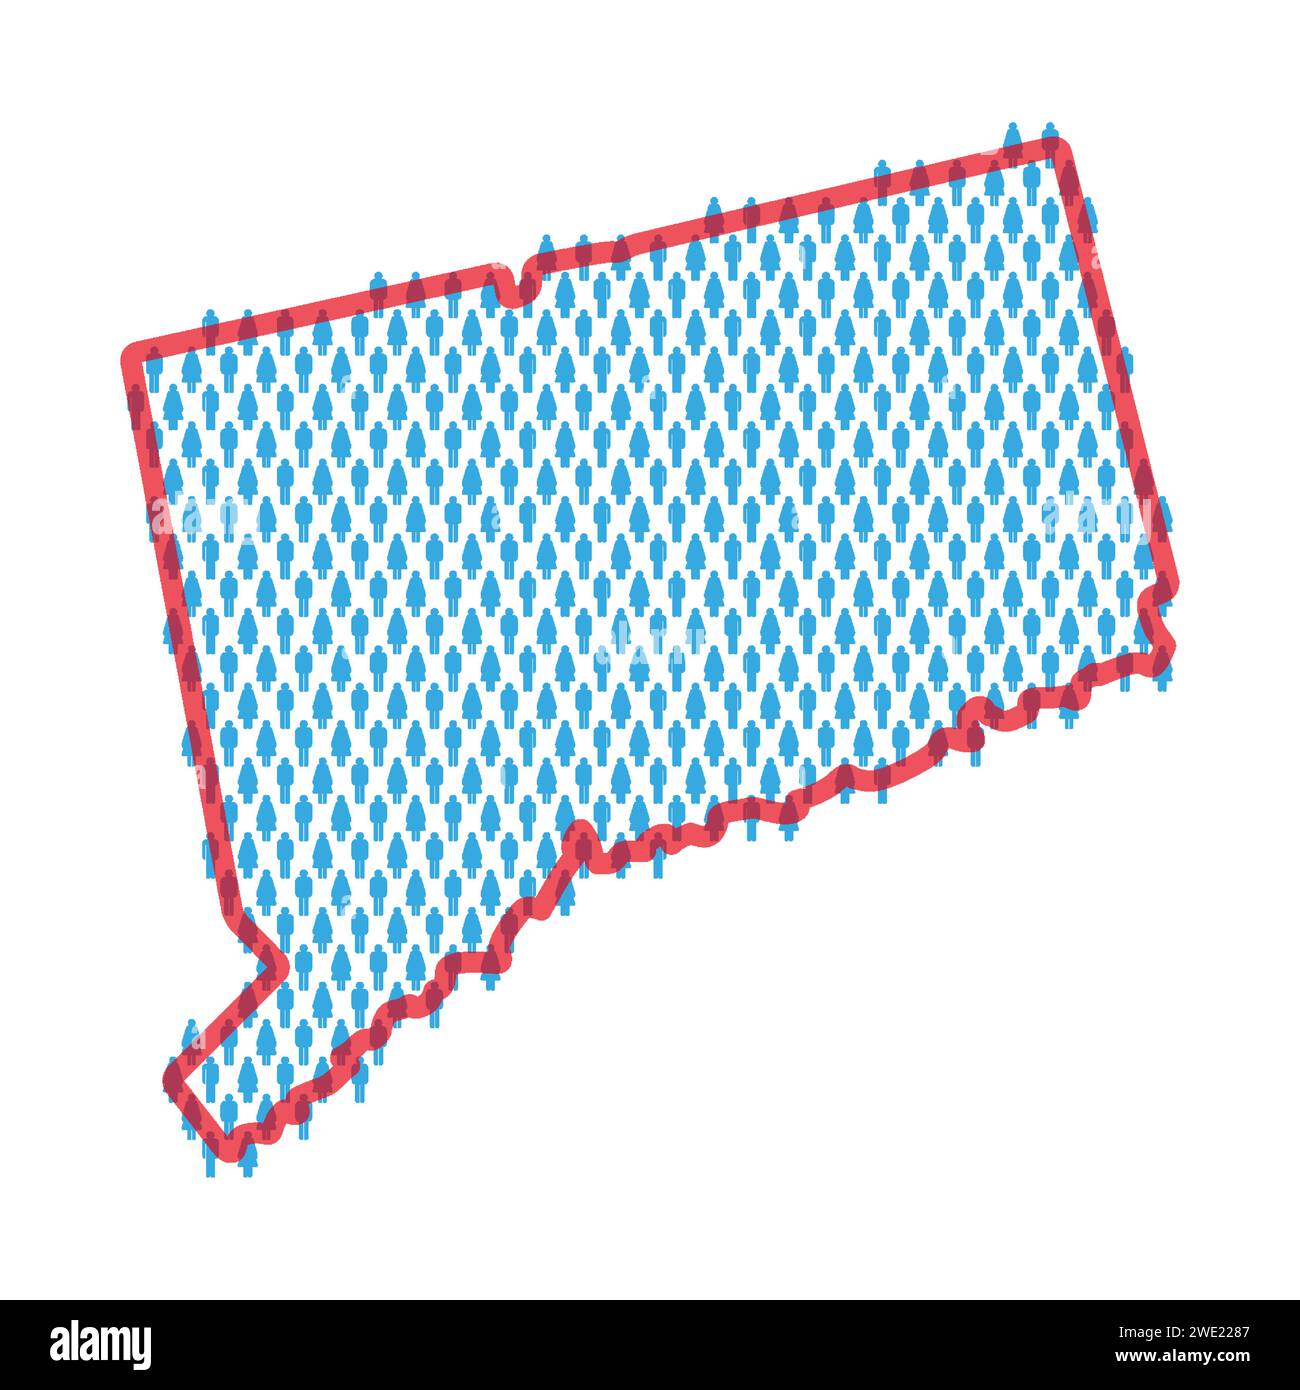 Connecticut population map. Stick figures people map with bold red translucent state border. Pattern of men and women icons. Isolated vector illustrat Stock Vector